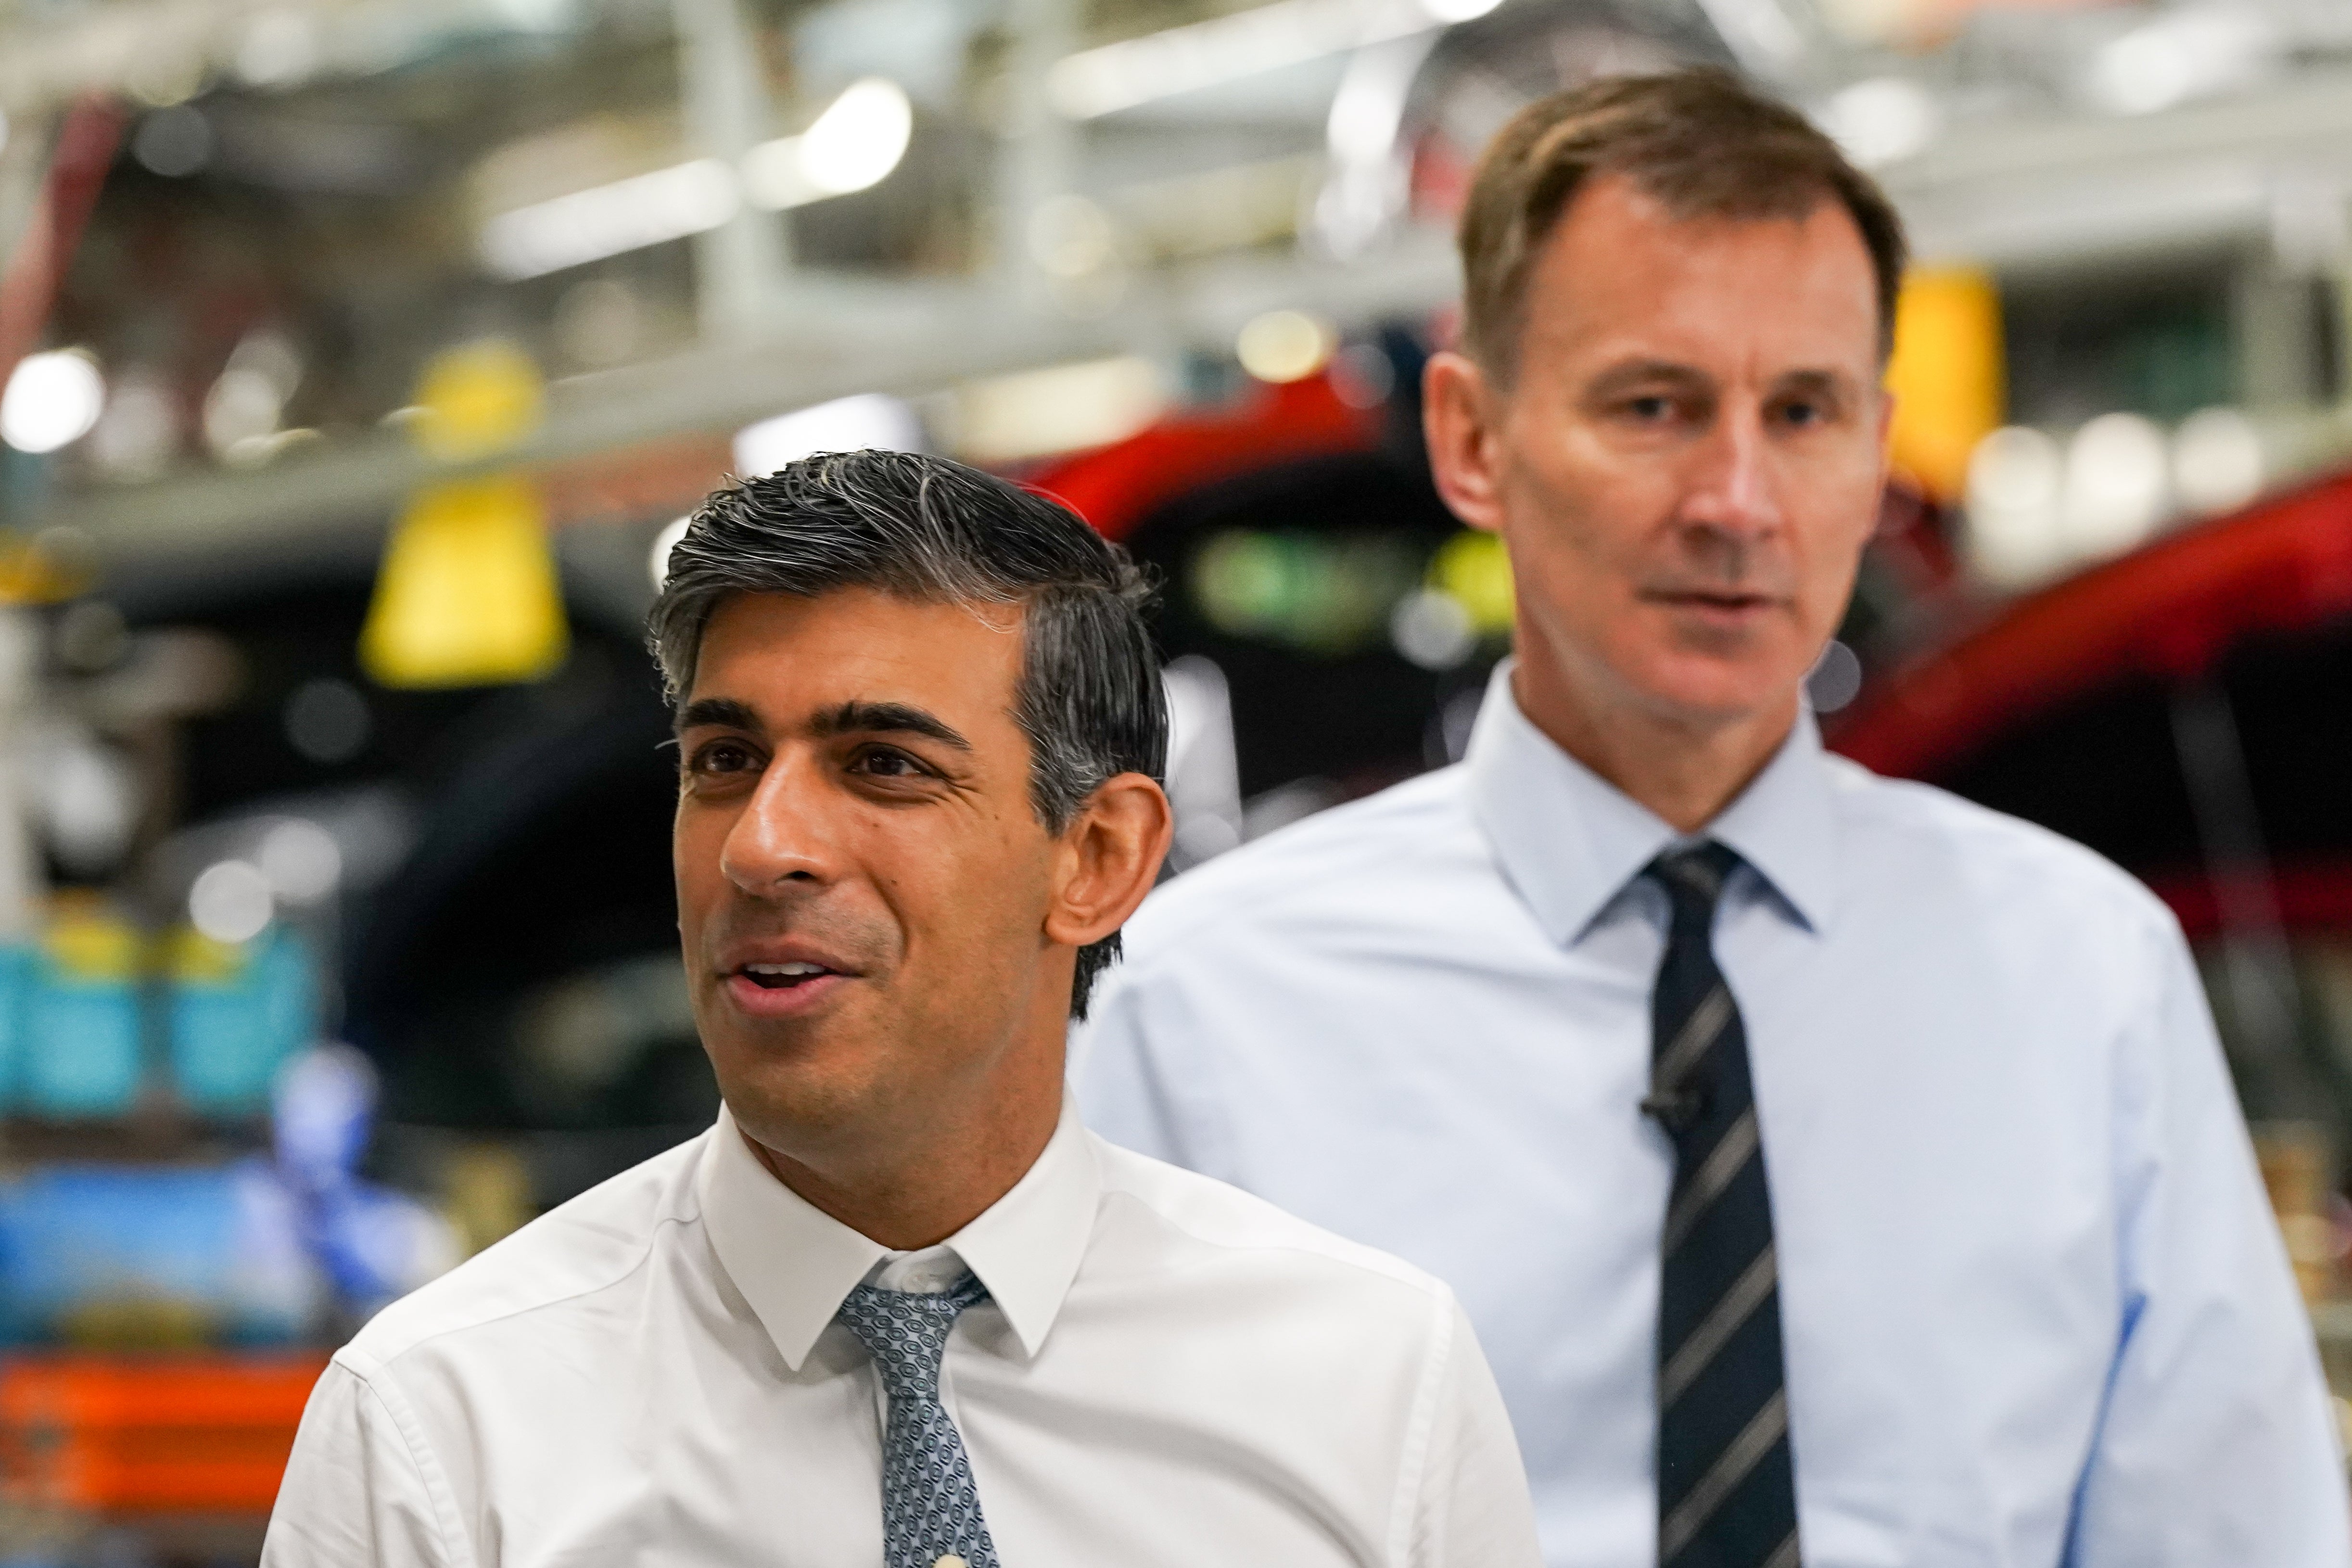 Hunt and Rishi Sunak hope a tax giveaway will help turnaround the Tories’ dire poll ratings